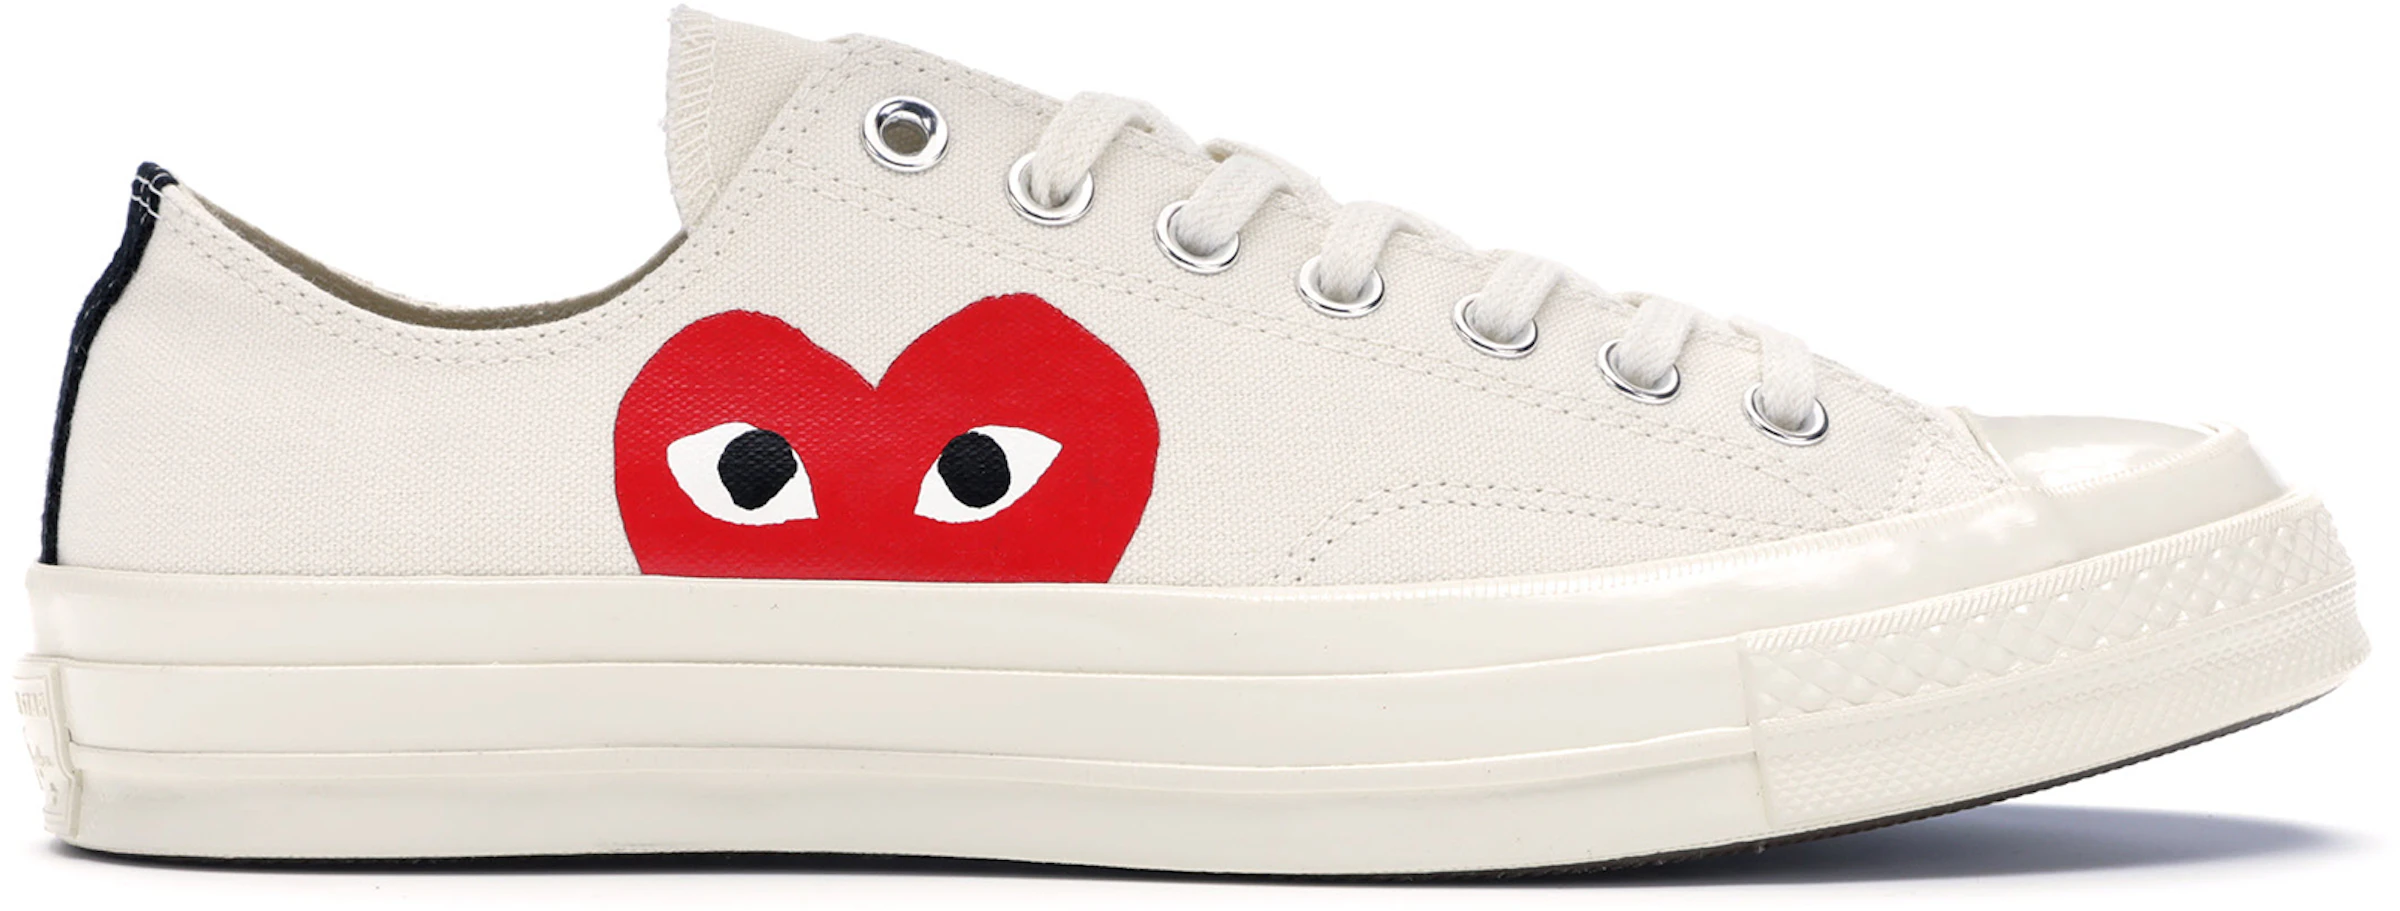 Converse Chuck Taylor All-Star 70 Ox Comme des Garcons PLAY White - 150207C  - US